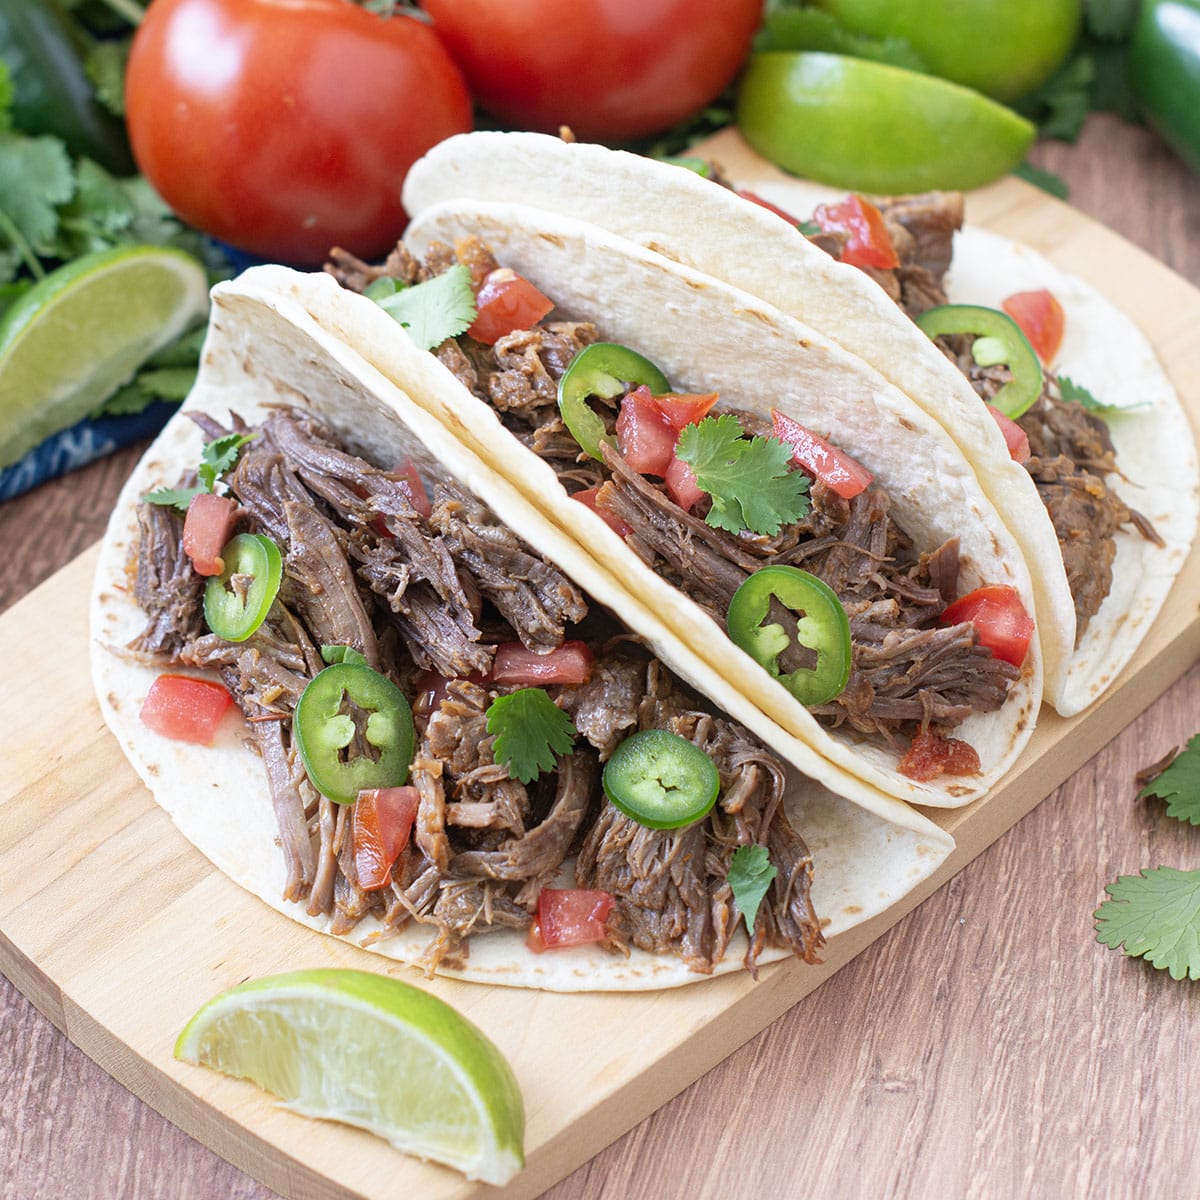 Shredded beef tacos with jalapeno and tomato with lime wedges.